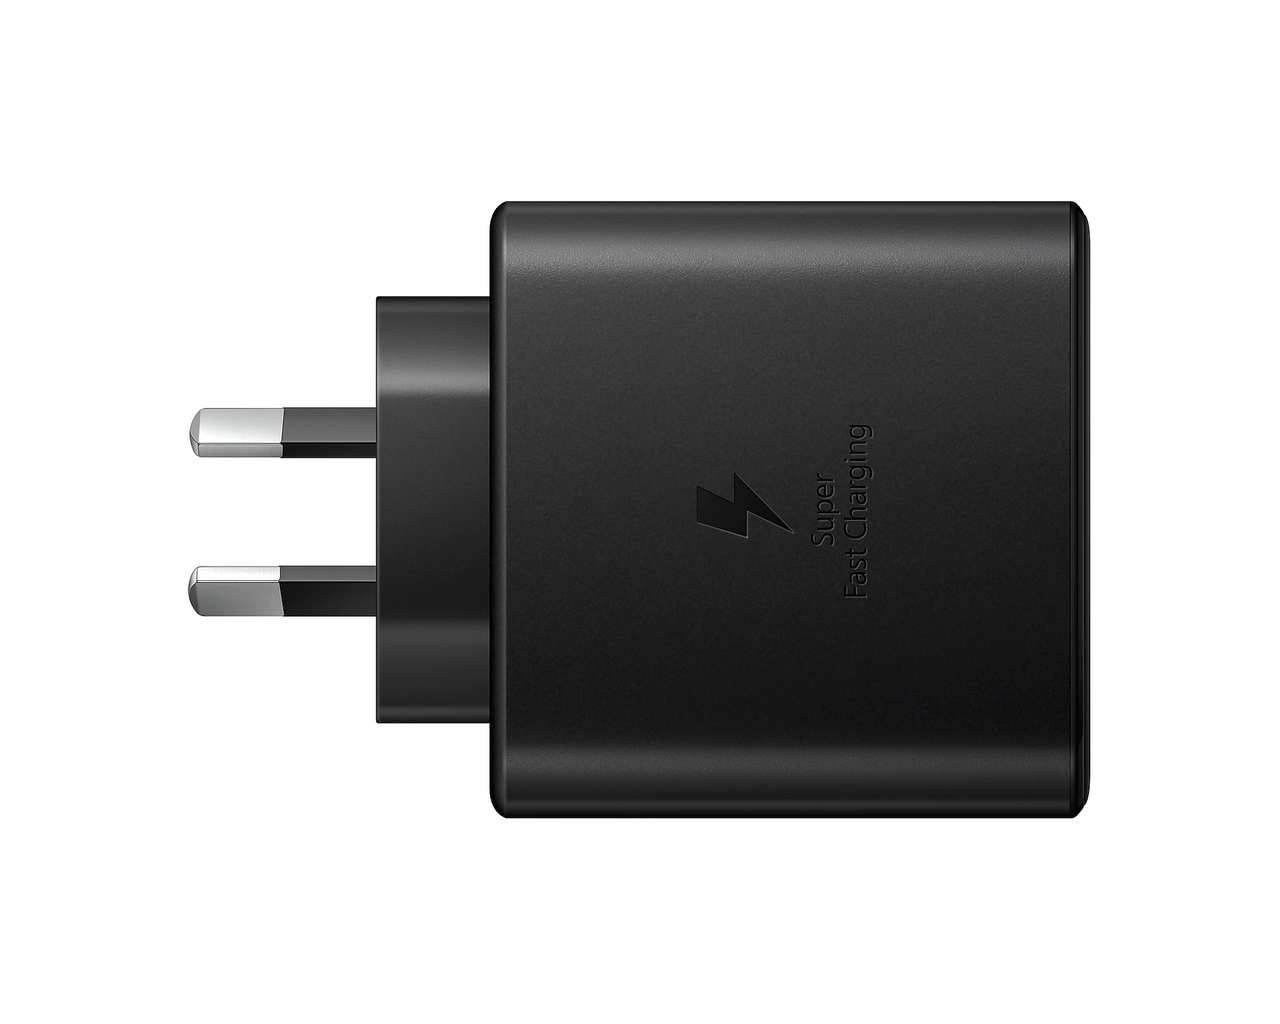 Samsung 45W PD AC SUPER fast Charger 2.0 AFC USB-C - Black (Includes Cable)